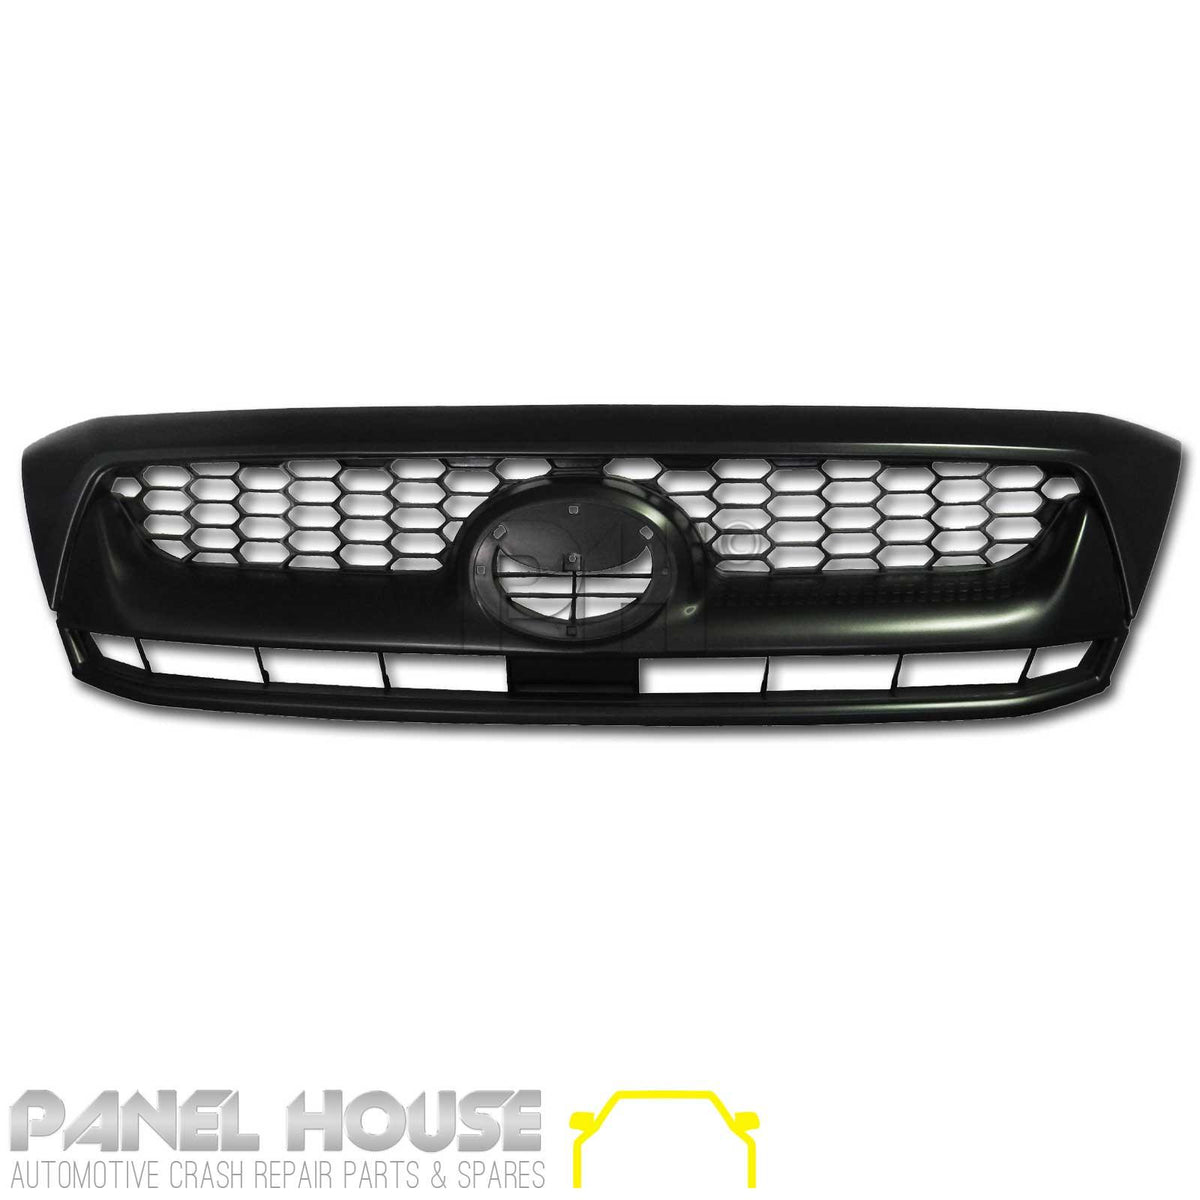 Grill Replacement Grey Fits Toyota Hilux Ute 2008-2011 SR WorkMate - 4X4OC™